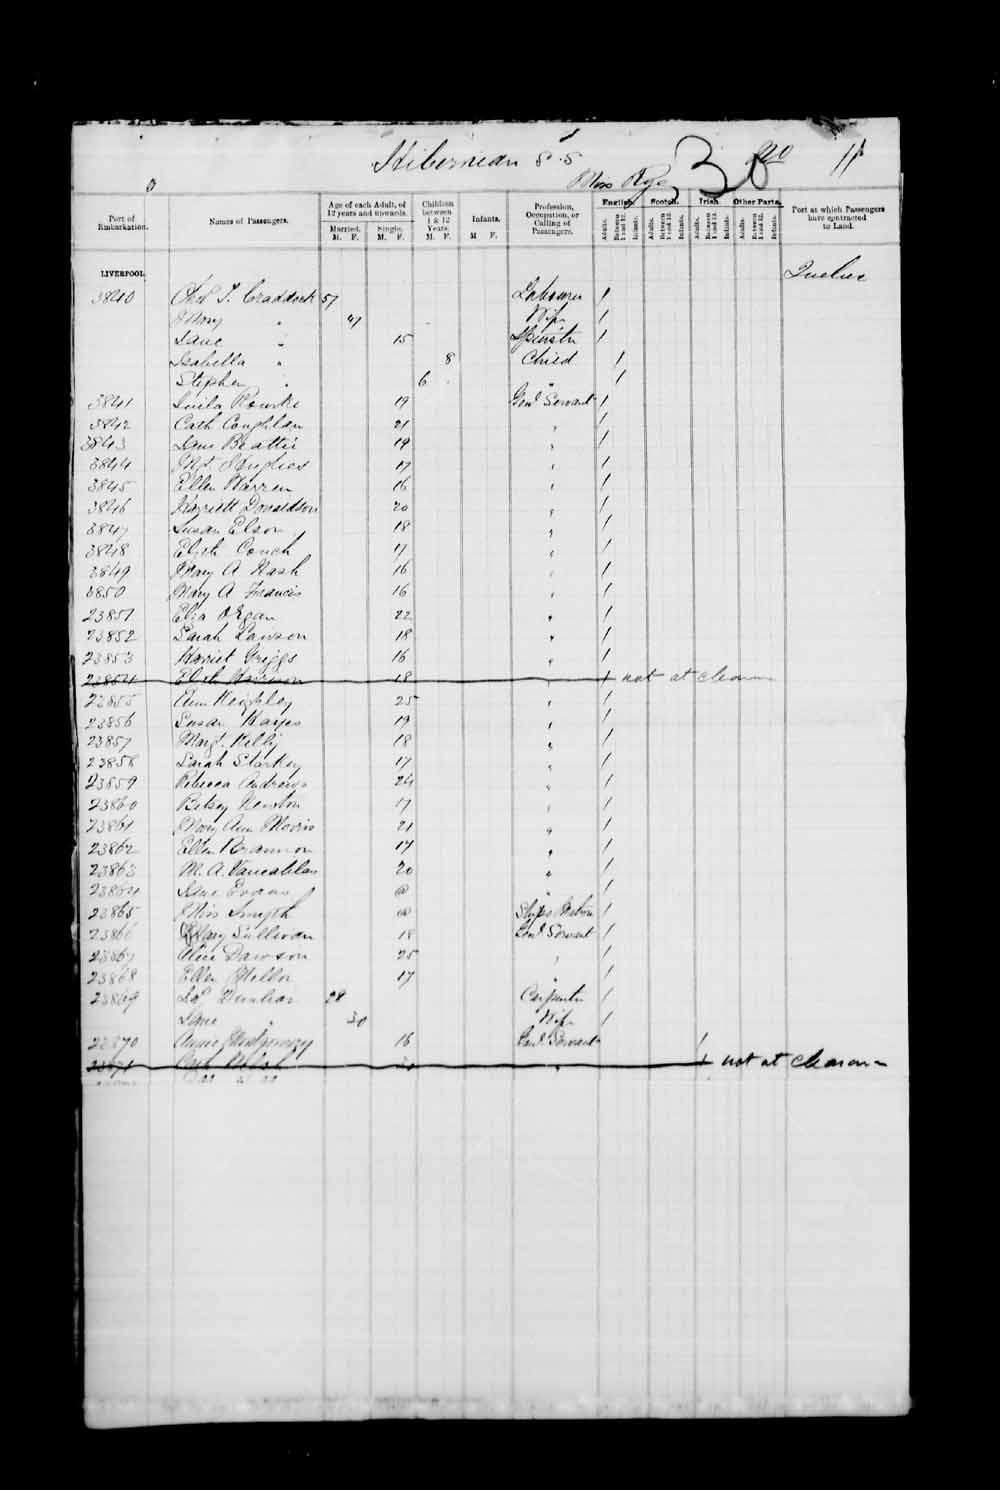 Digitized page of Passenger Lists for Image No.: e003530473